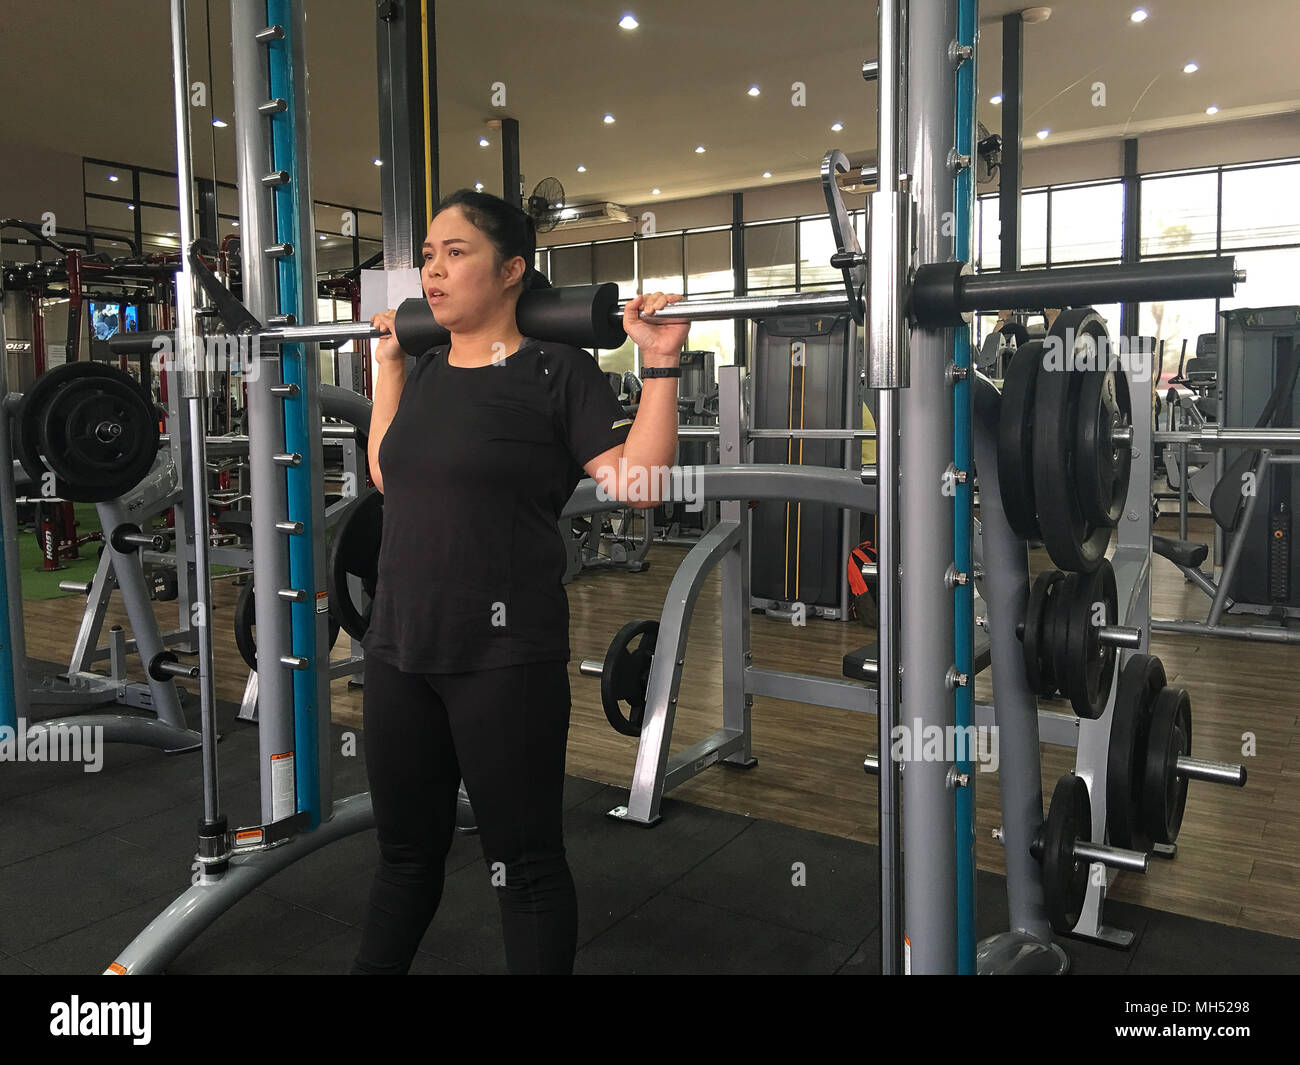 Asia fat girl training squat by barbell equipment in the gym for strength, weight loss. Stock Photo